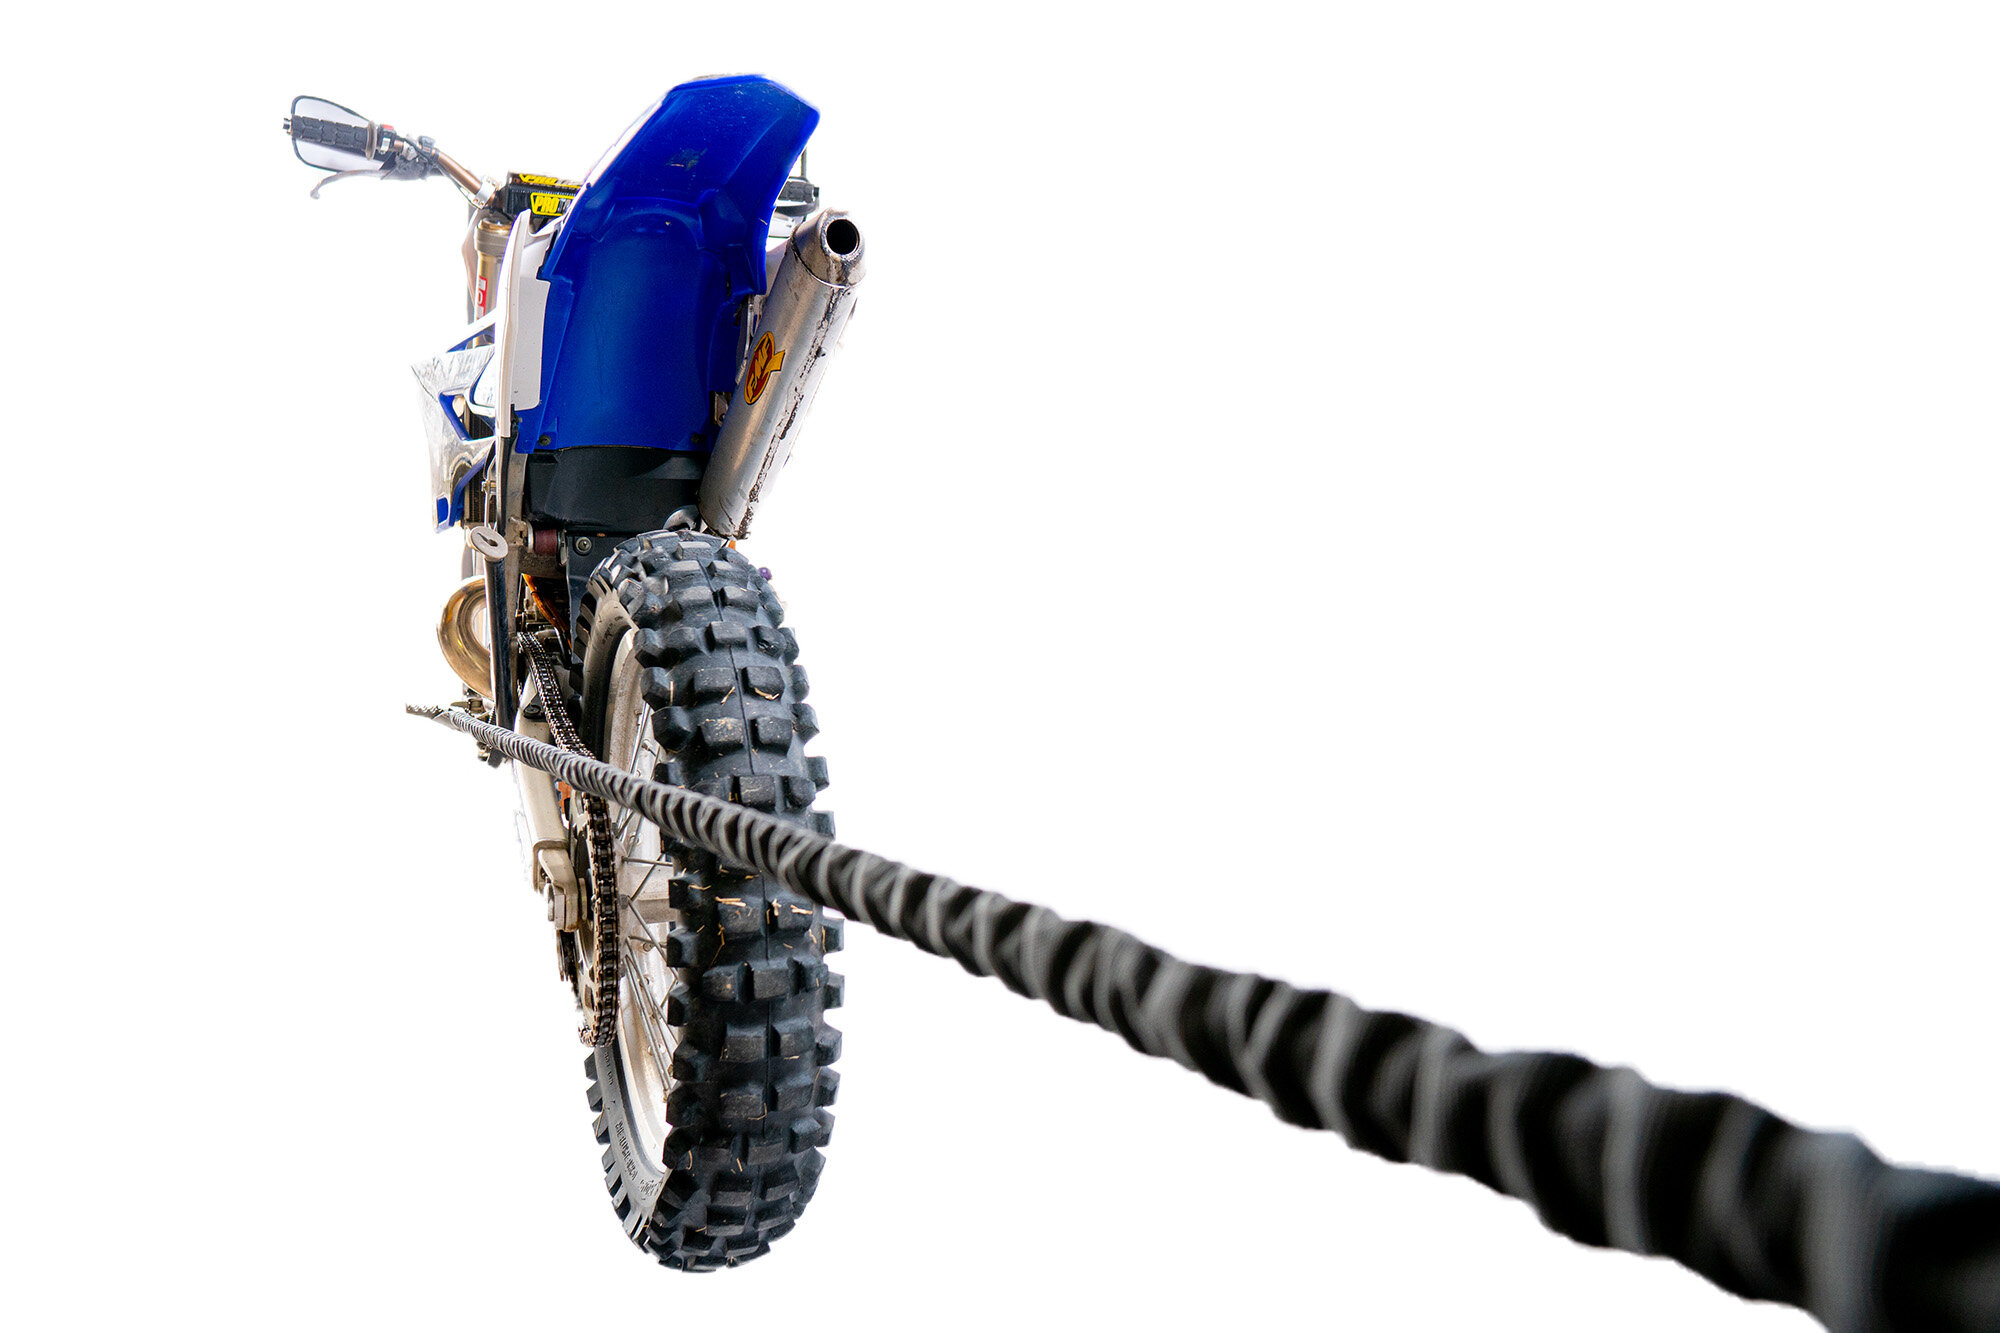 Everything you need to know about bungee cord - Ropes Direct Ropes Direct